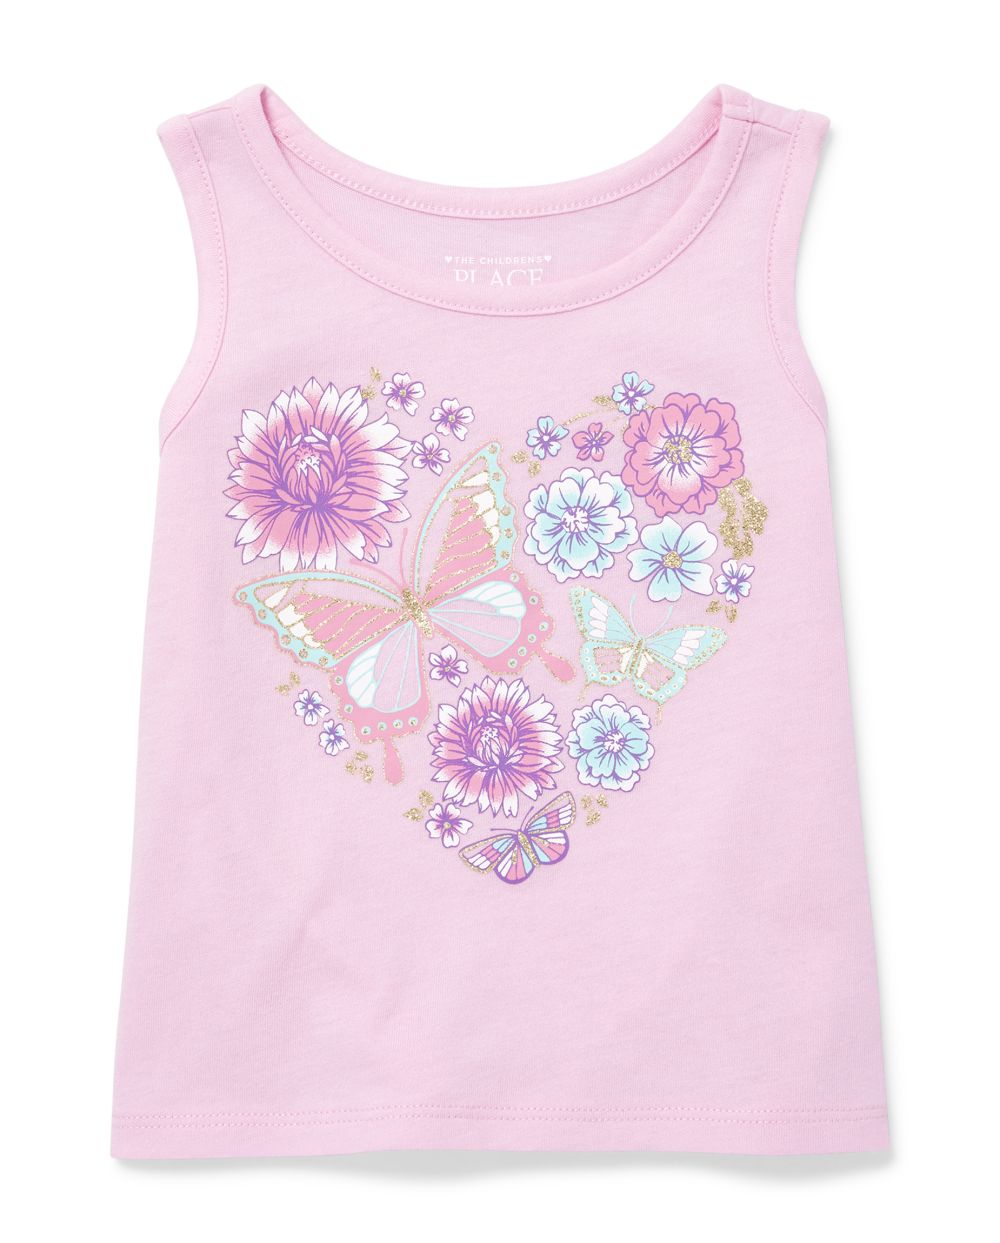 Baby And Toddler Girls Mix And Match Glitter Graphic Tank Top